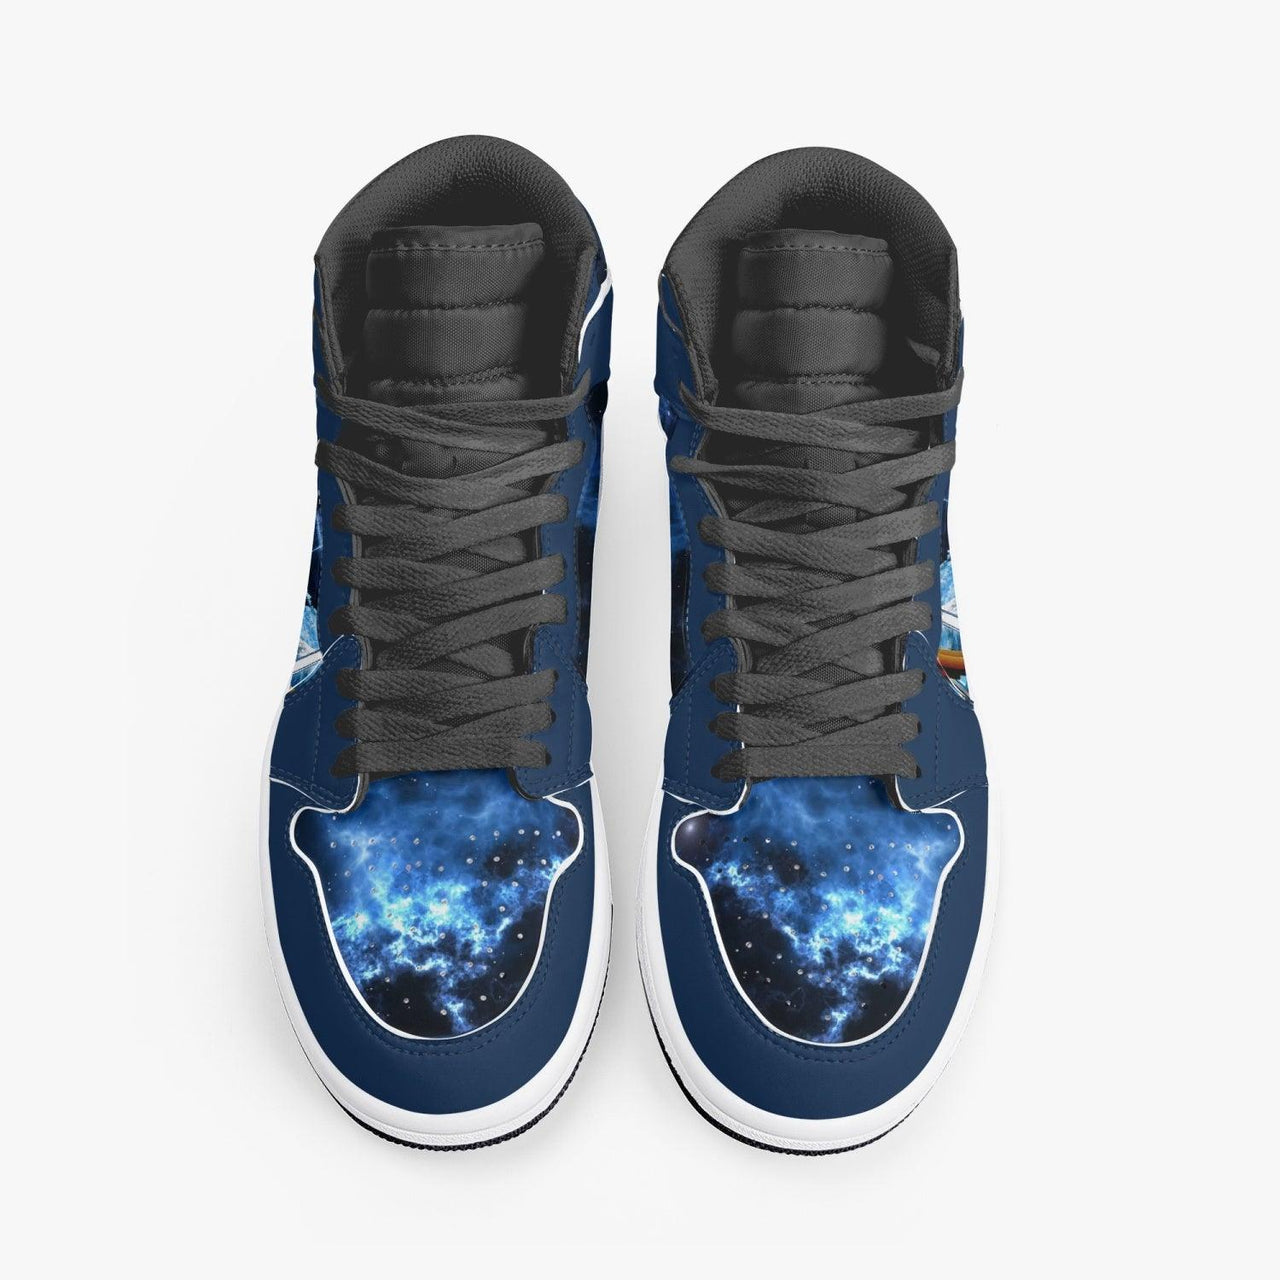 Kirito JD13 Sneakers: Blue & Light Blue Style Inspired by Sword